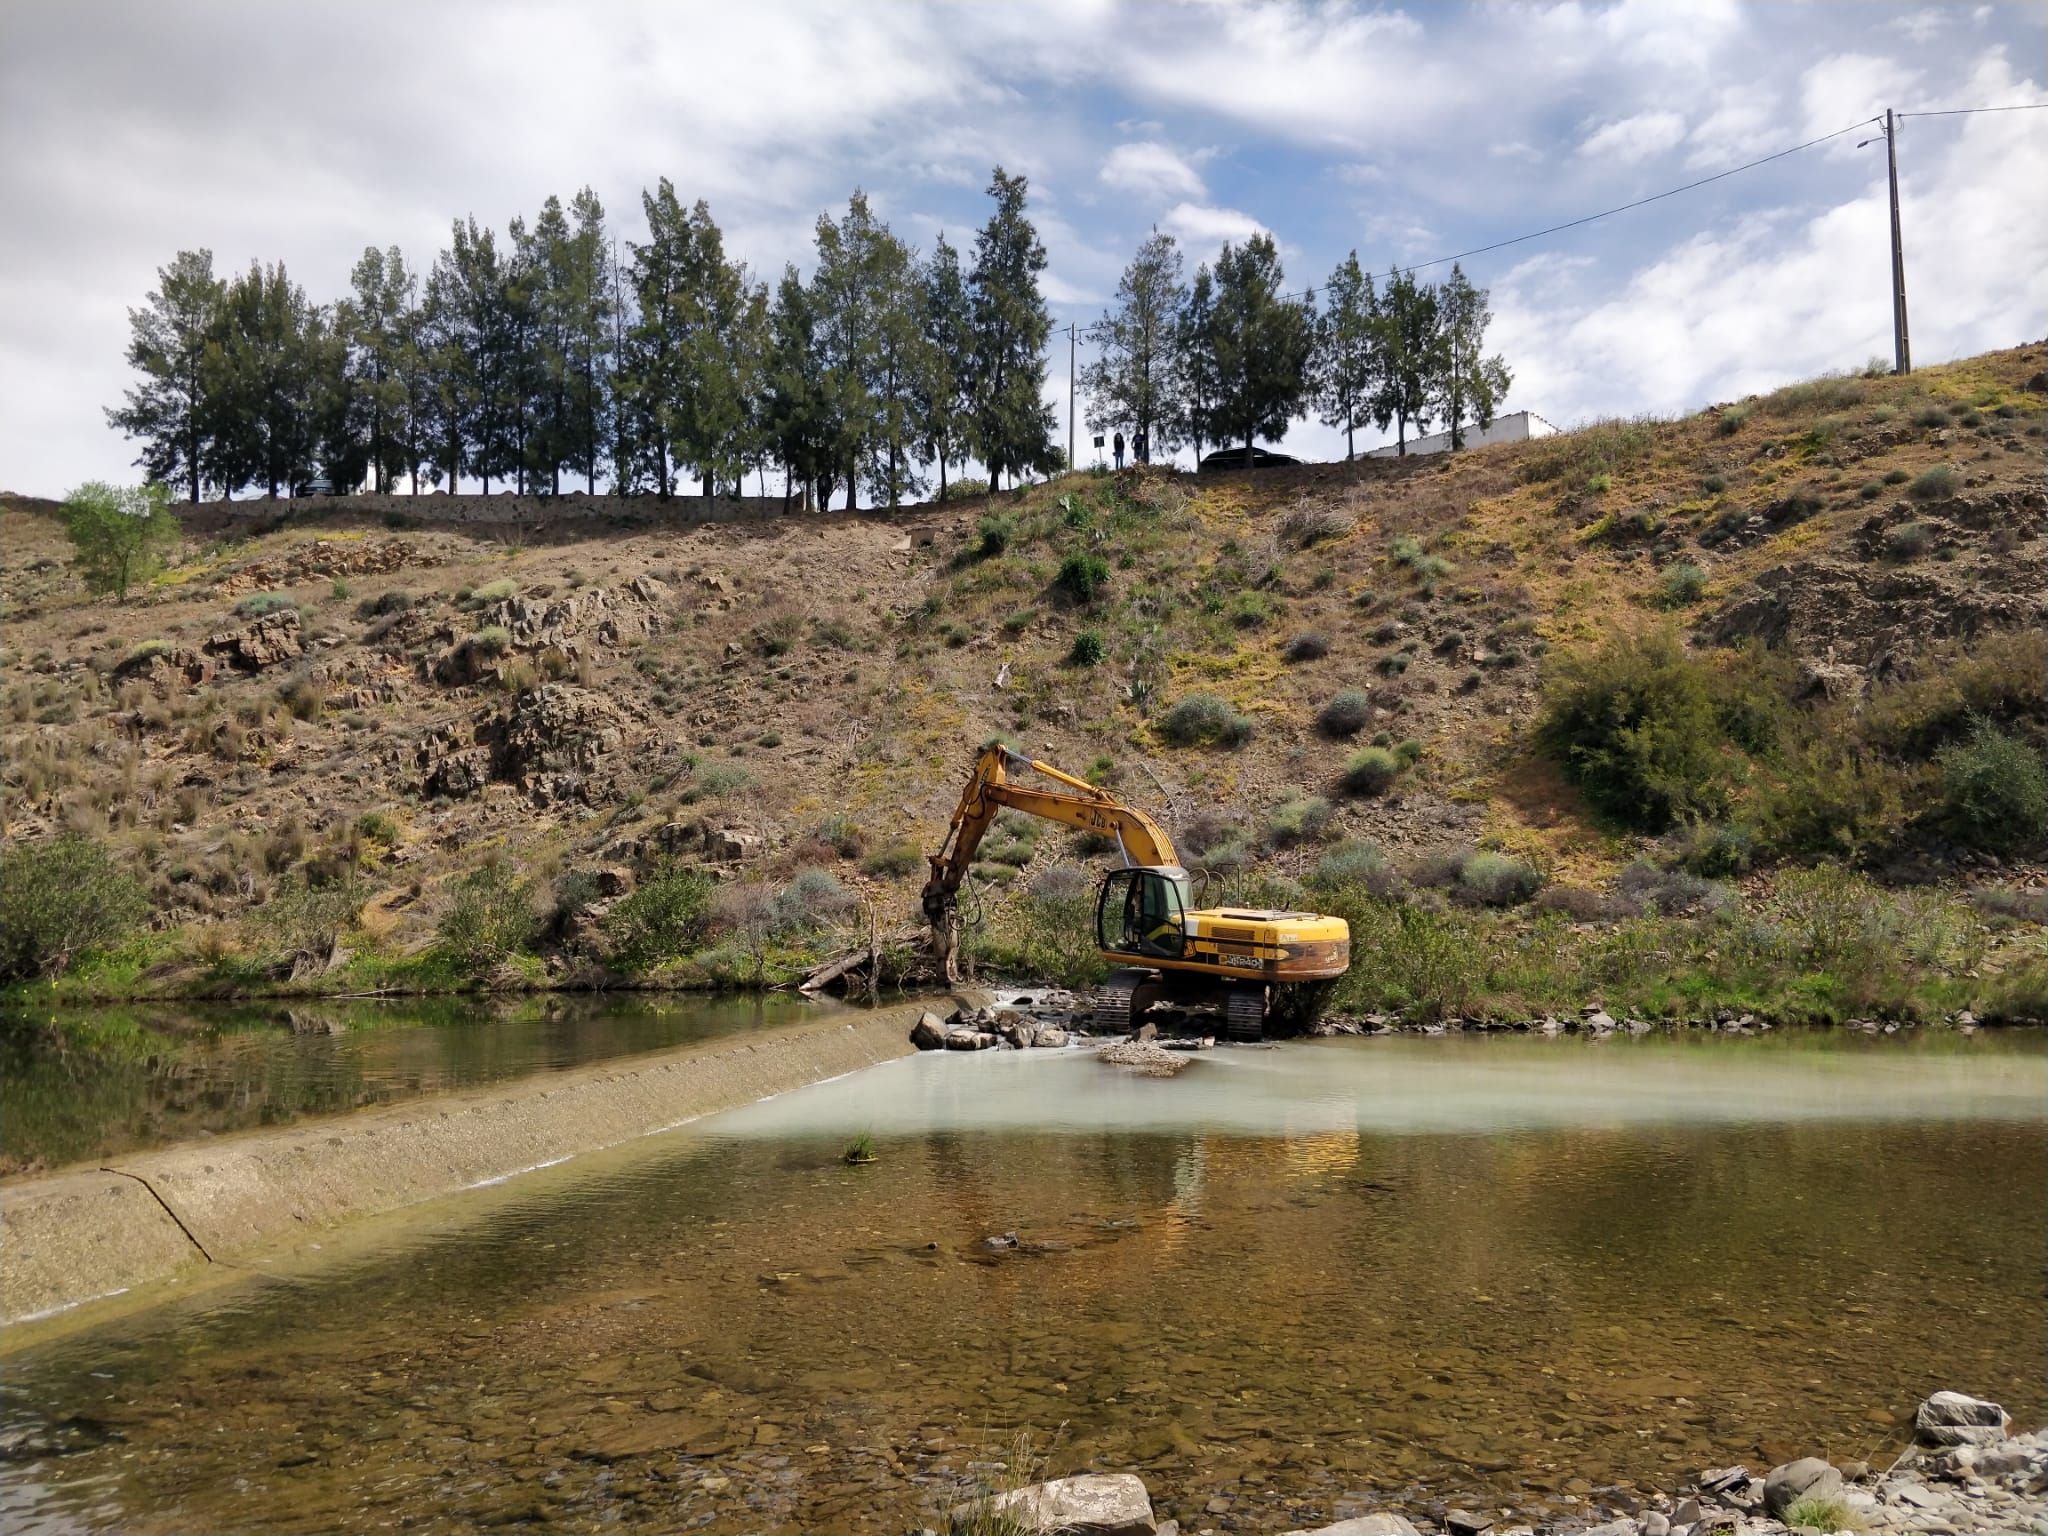 Galaxes dam removal in Portugal